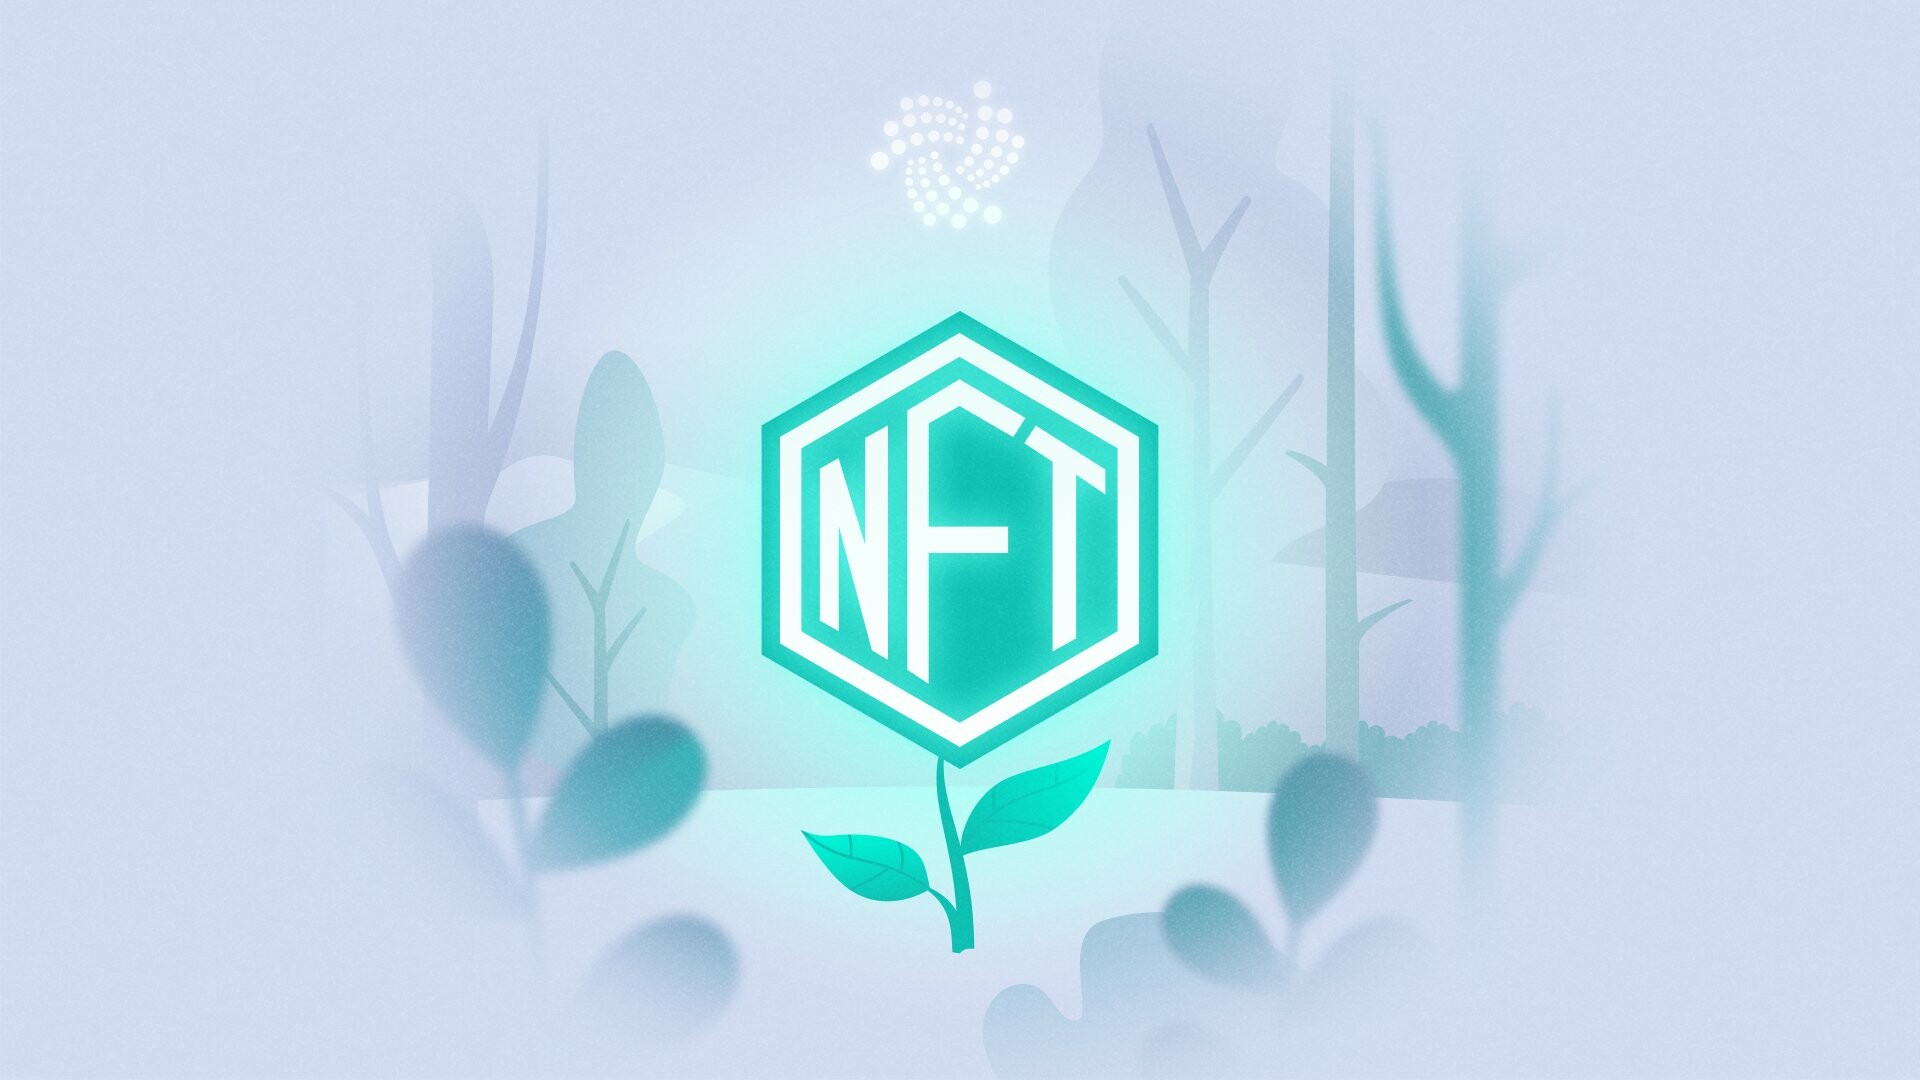 NFT: Type of cryptographic token on a blockchain that represents a unique asset. 1920x1080 Full HD Background.